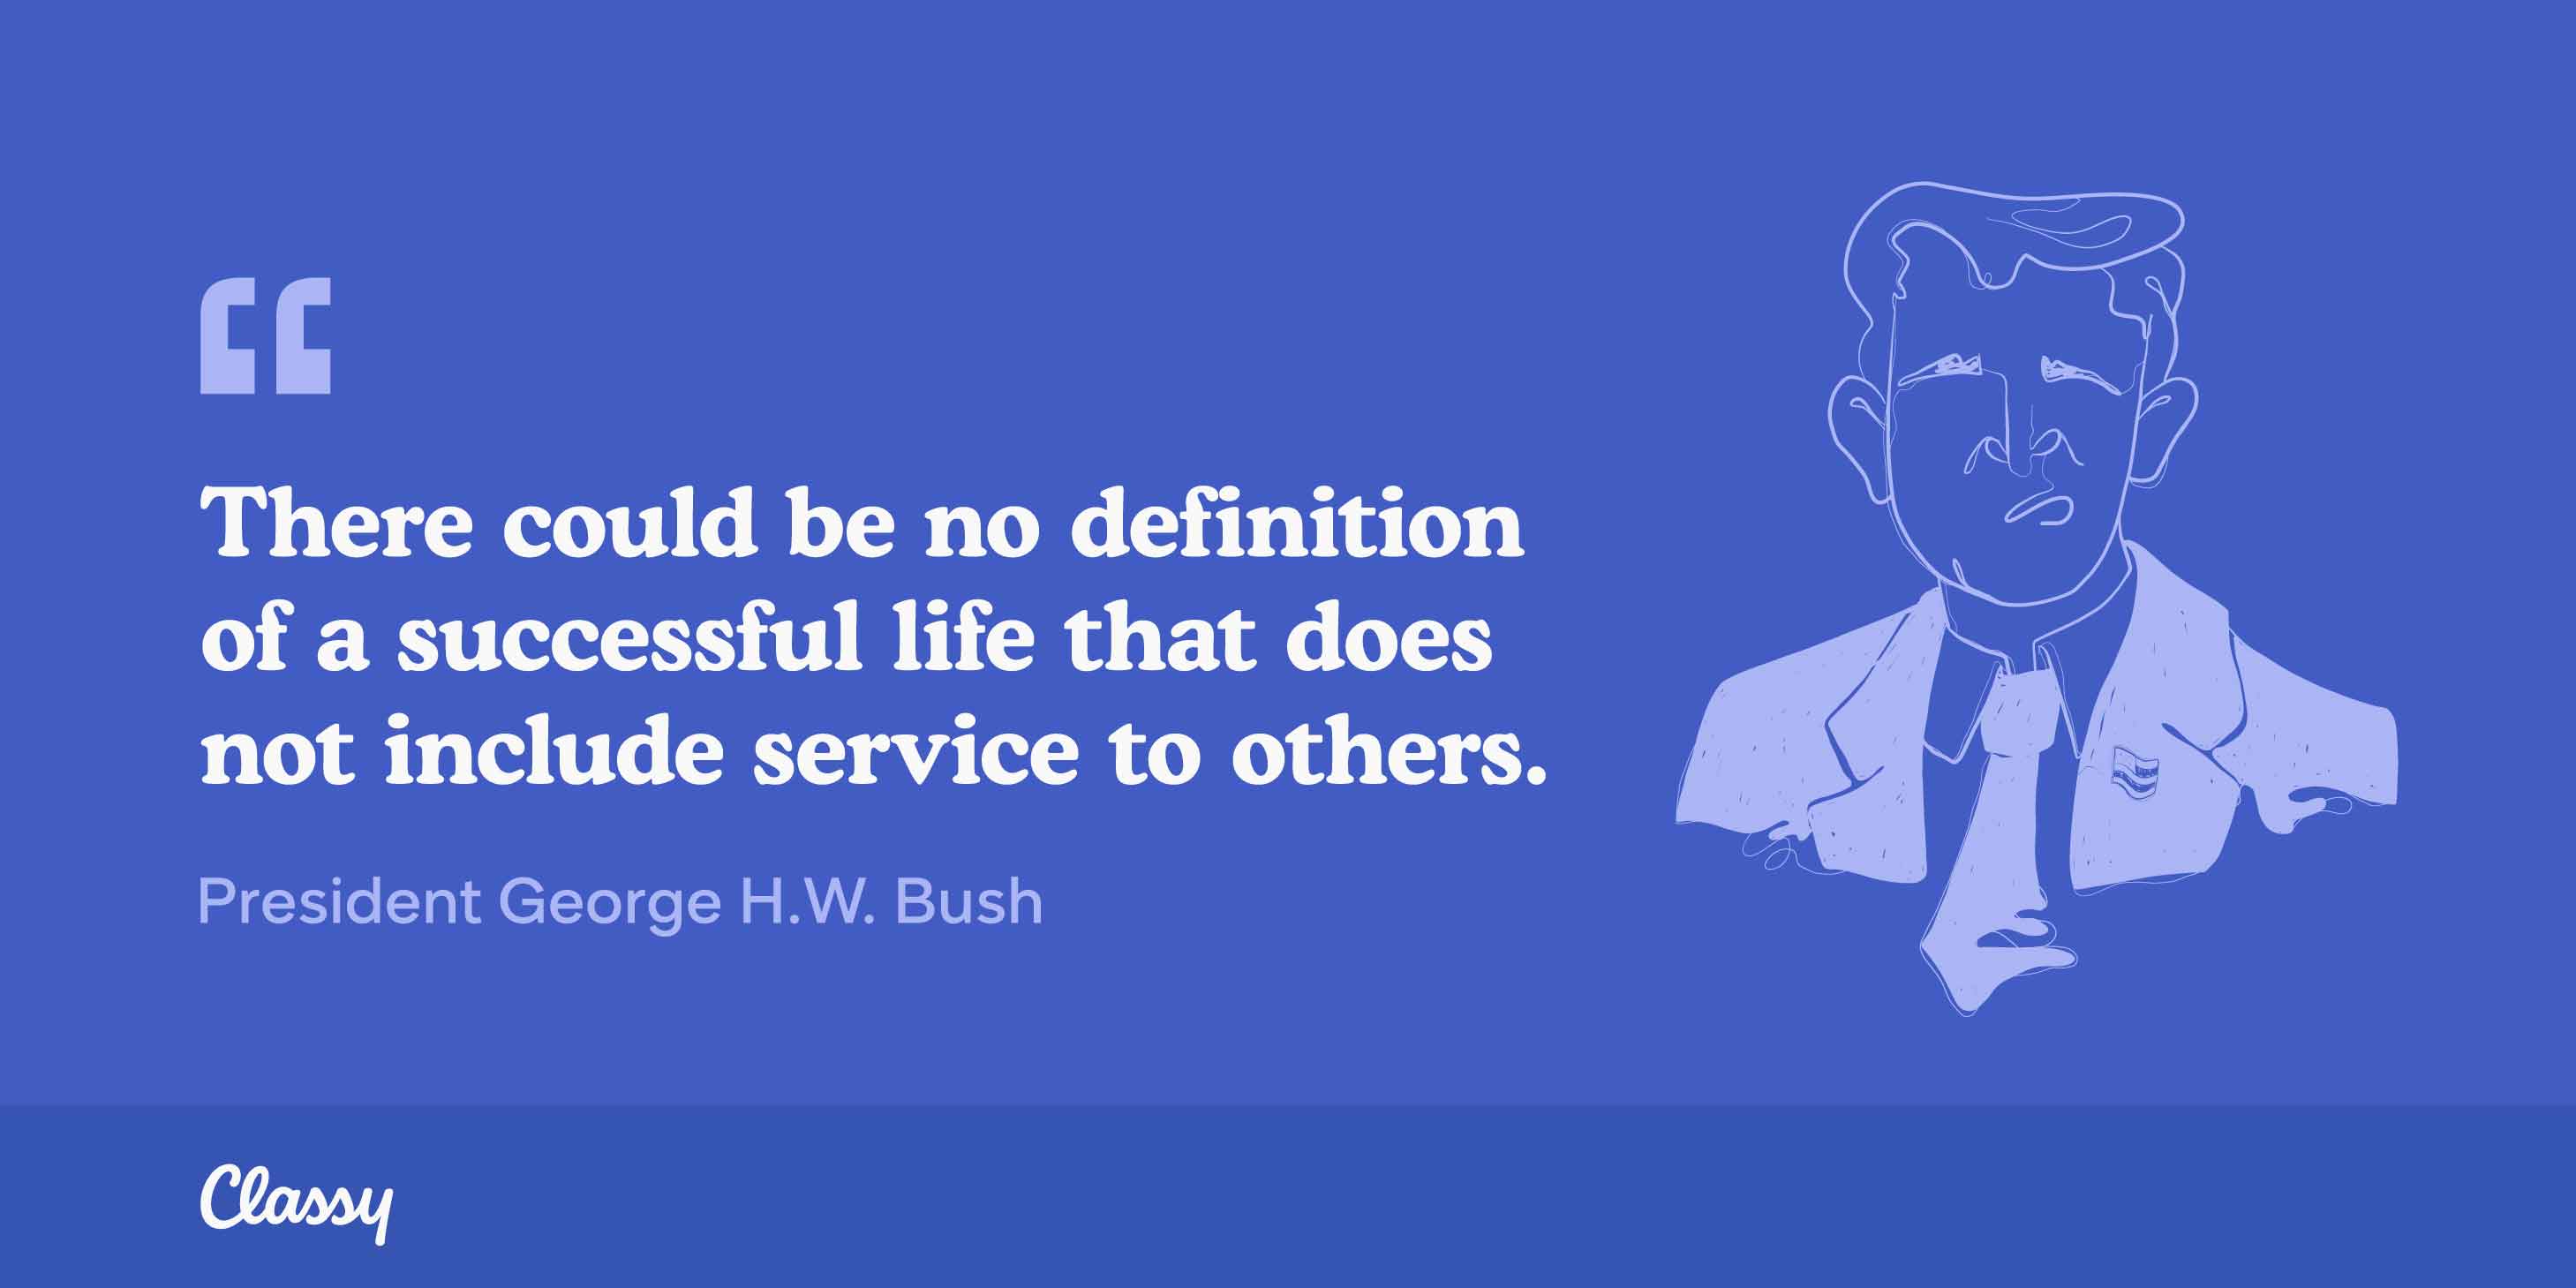 George H.W. Bush giving quote